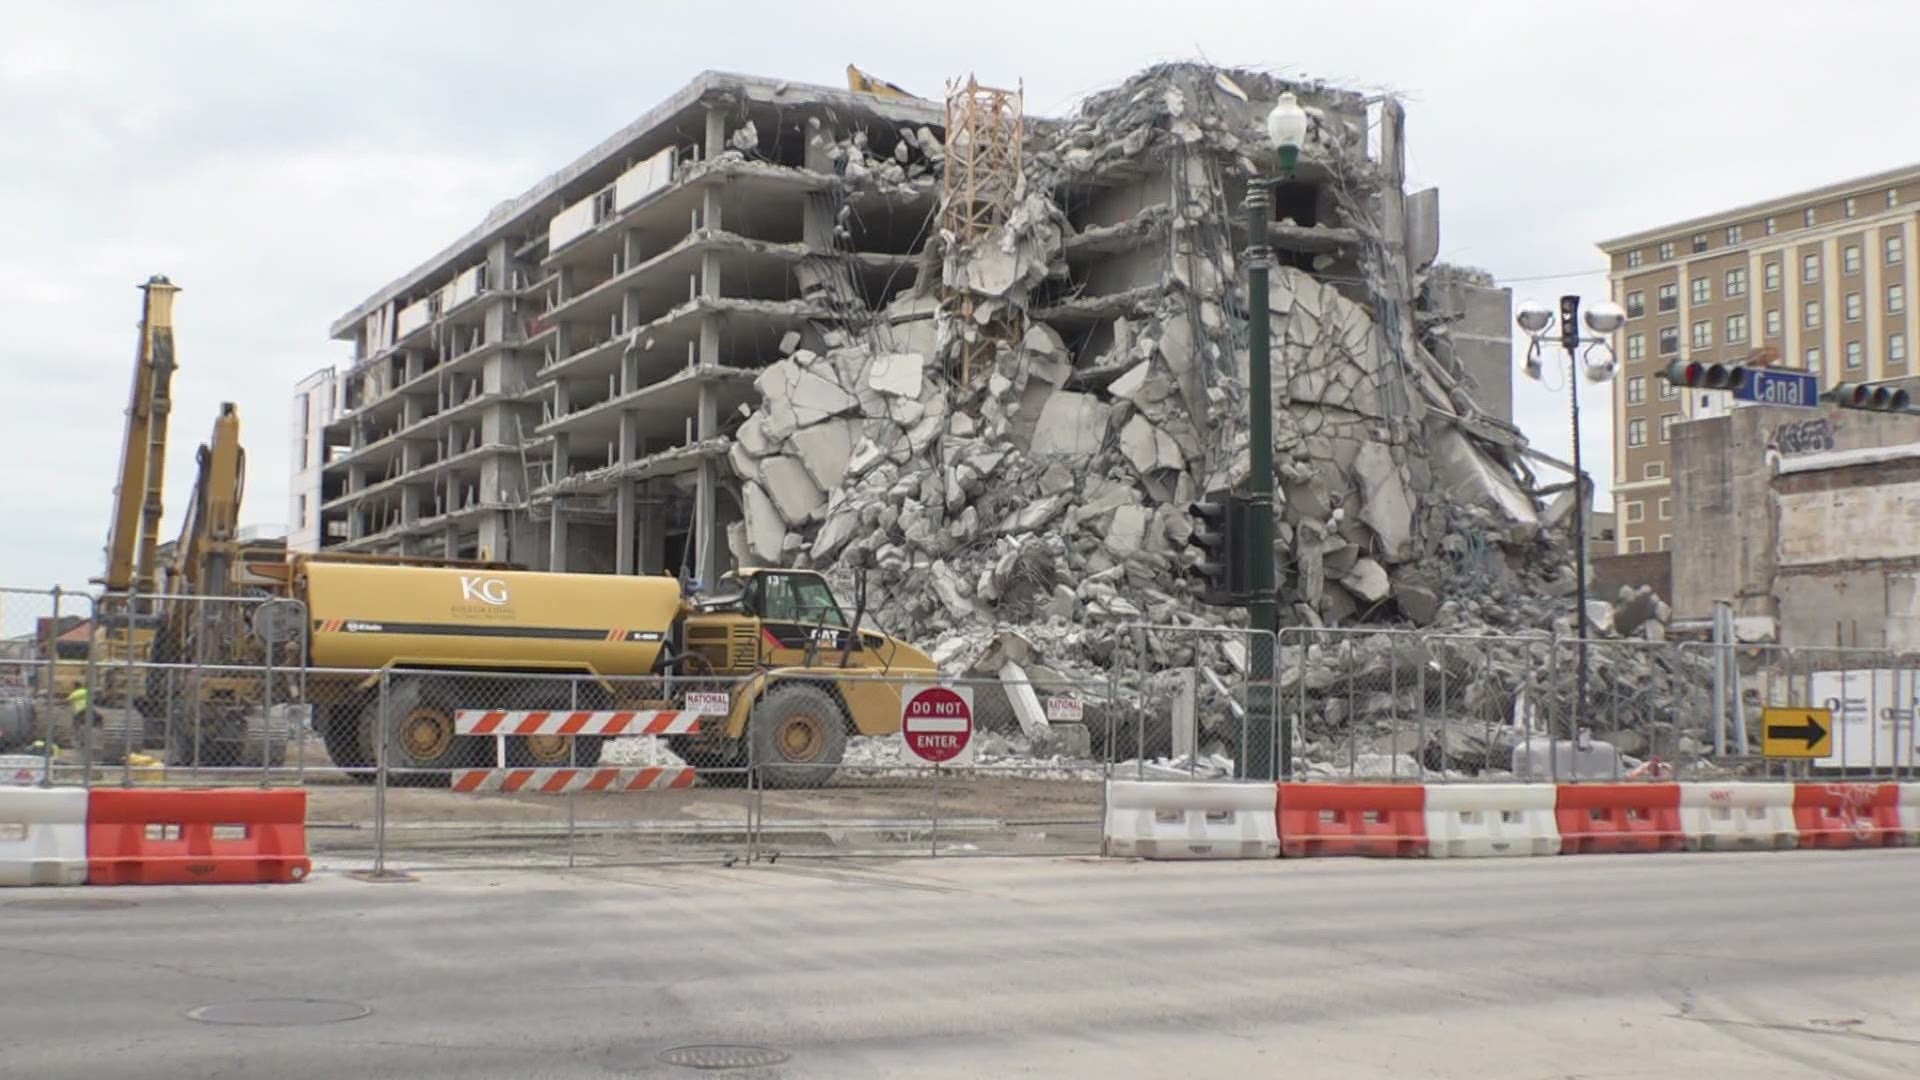 Hard Rock Hotel collapse demolition moving quickly, Canal St. reopening